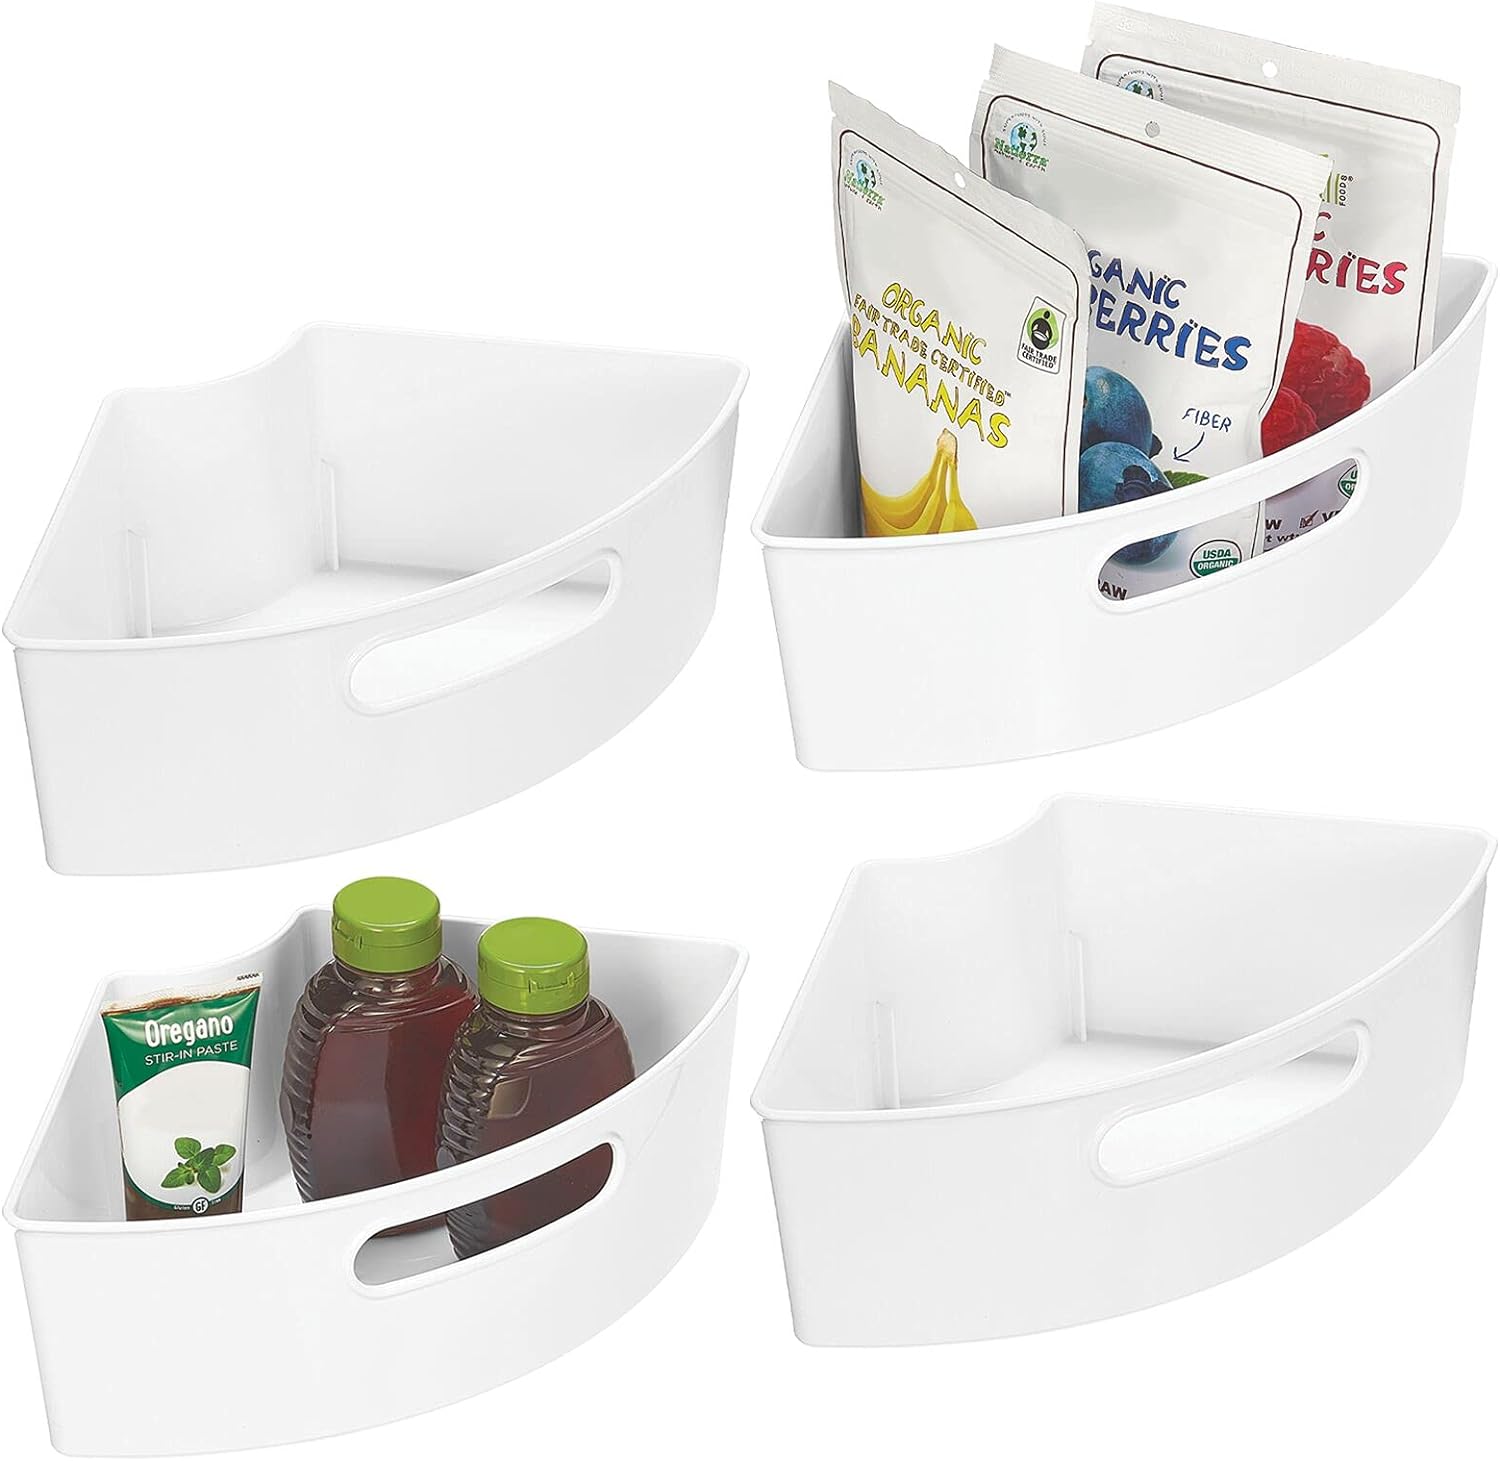 mDesign Plastic Lazy Susan Cabinet Storage Bin with Front Handle for Kitchen Countertop, Pantry, Shelf, Fridge Organization - Hold Food, Drinks, Snacks - Ligne Collection - 4 Pack - White